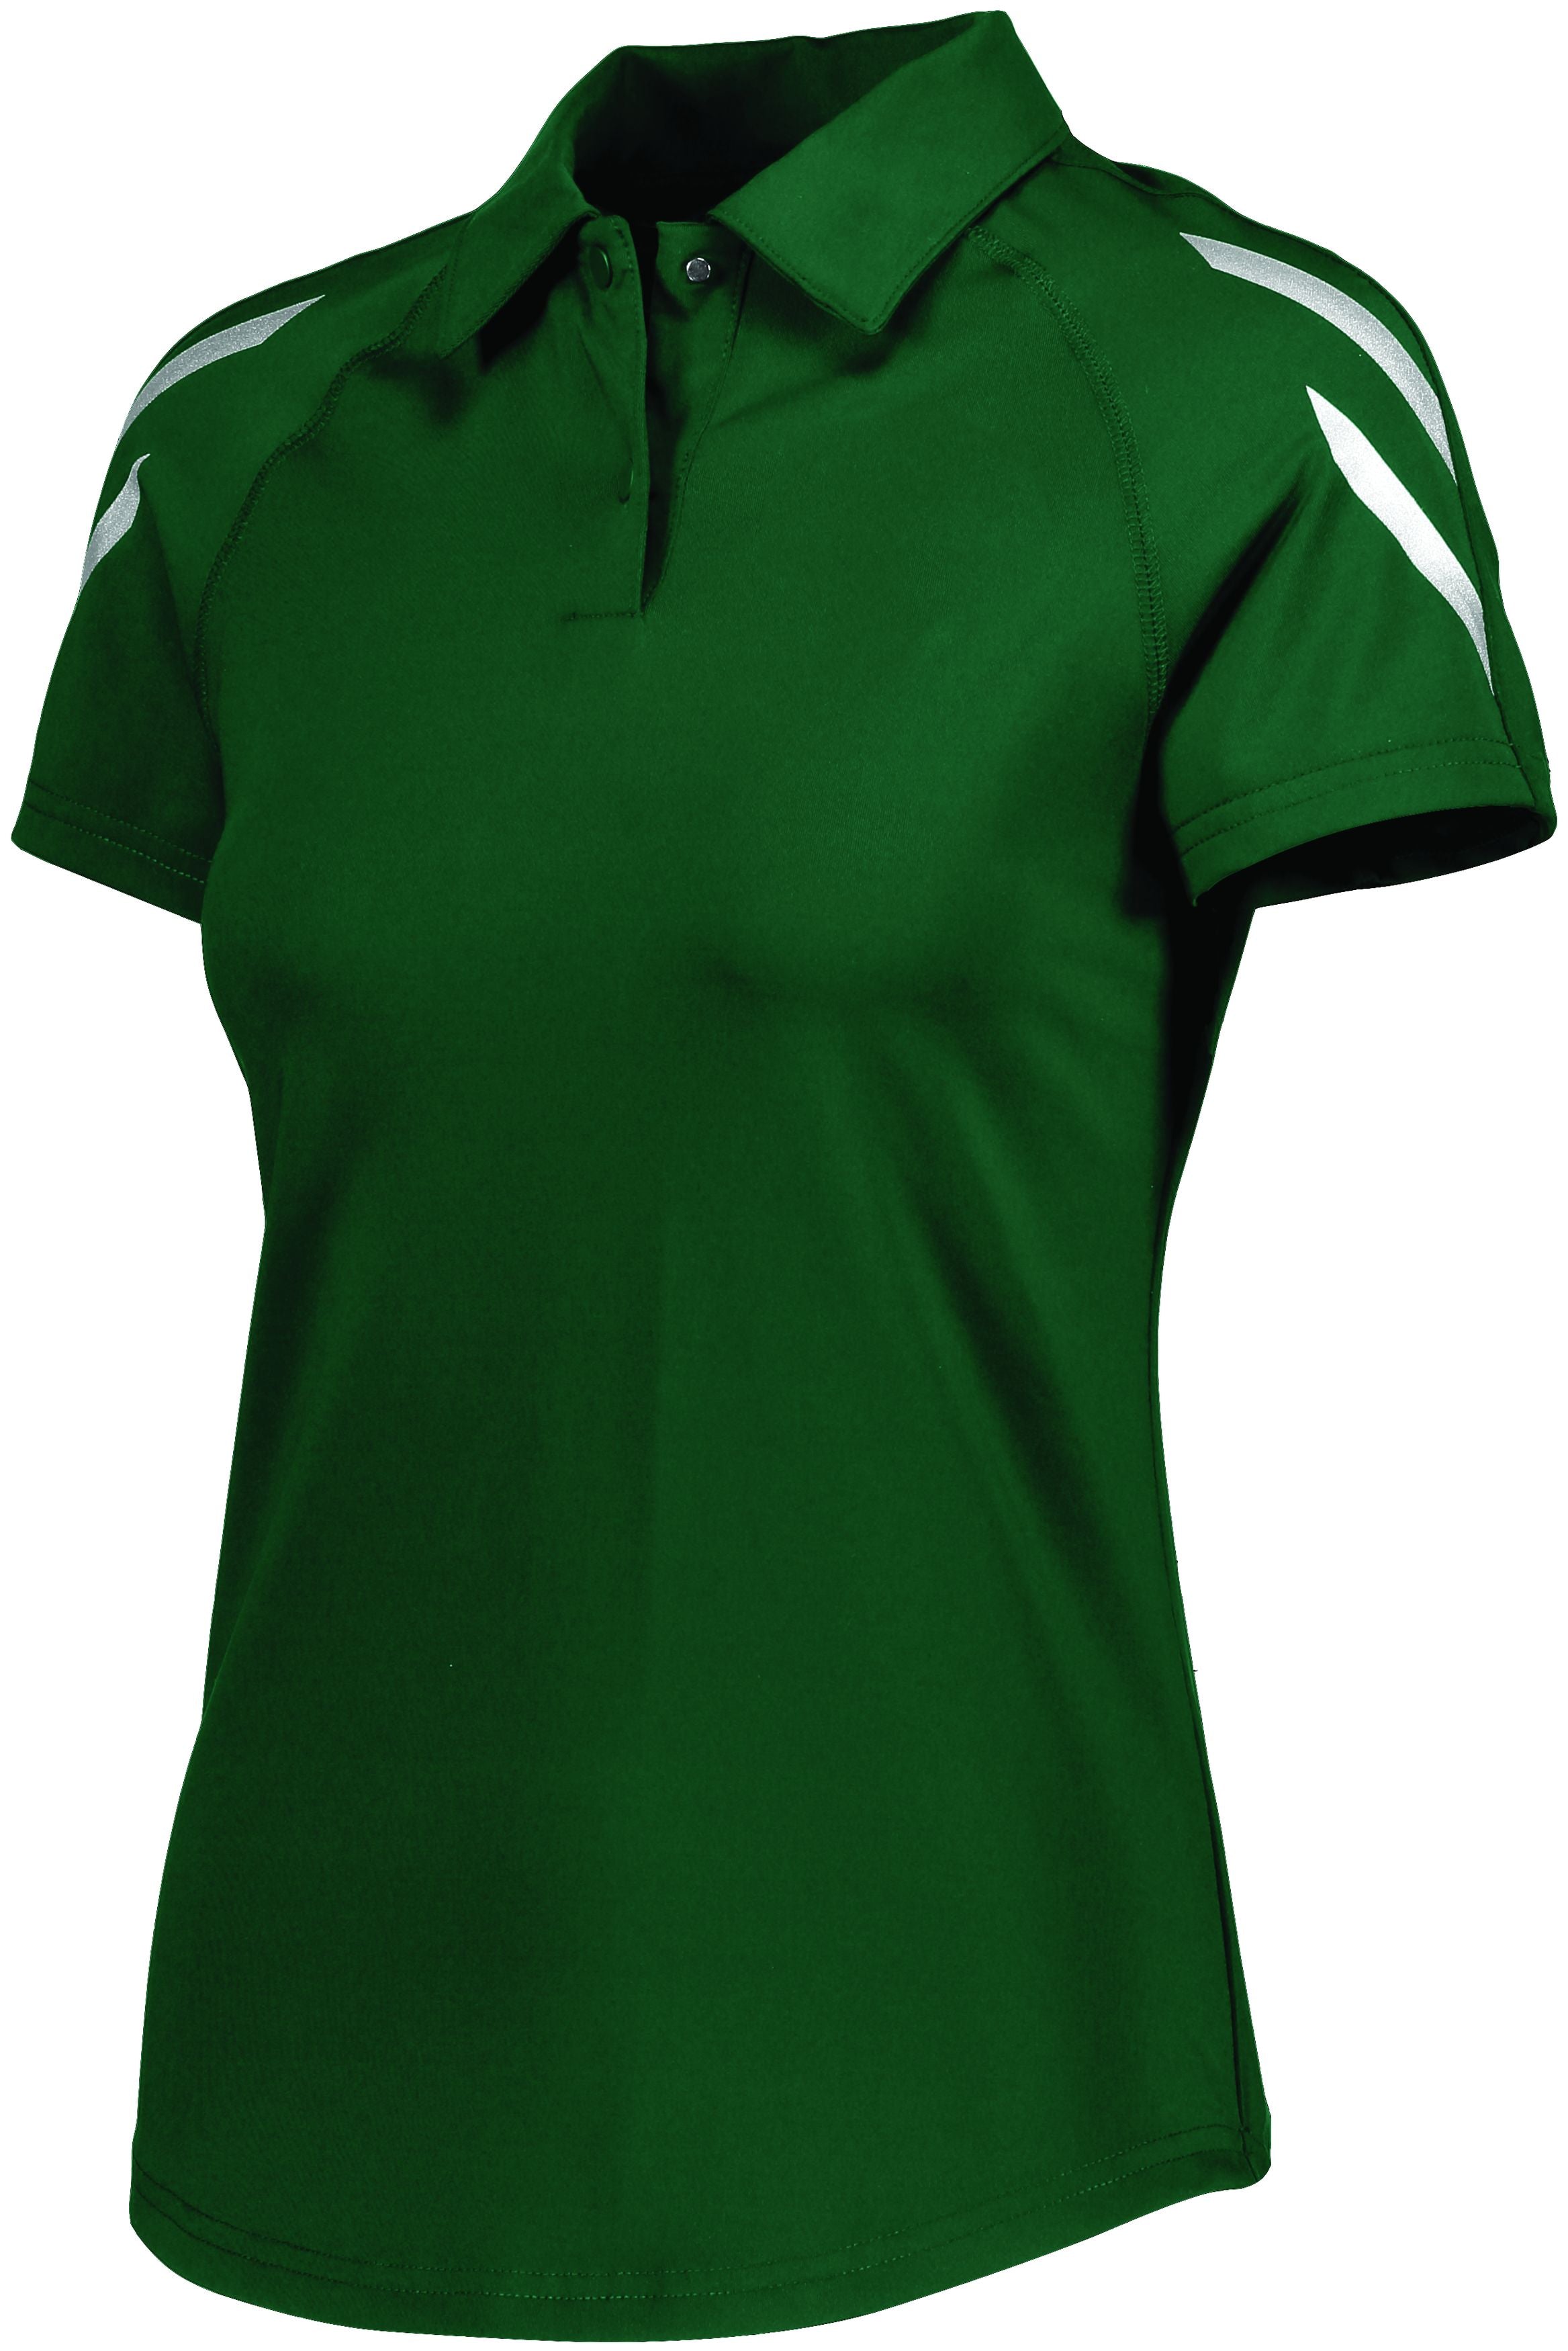 Holloway Ladies Flux Polo in Forest  -Part of the Ladies, Ladies-Polo, Polos, Holloway, Shirts, Flux-Collection, Corporate-Collection product lines at KanaleyCreations.com